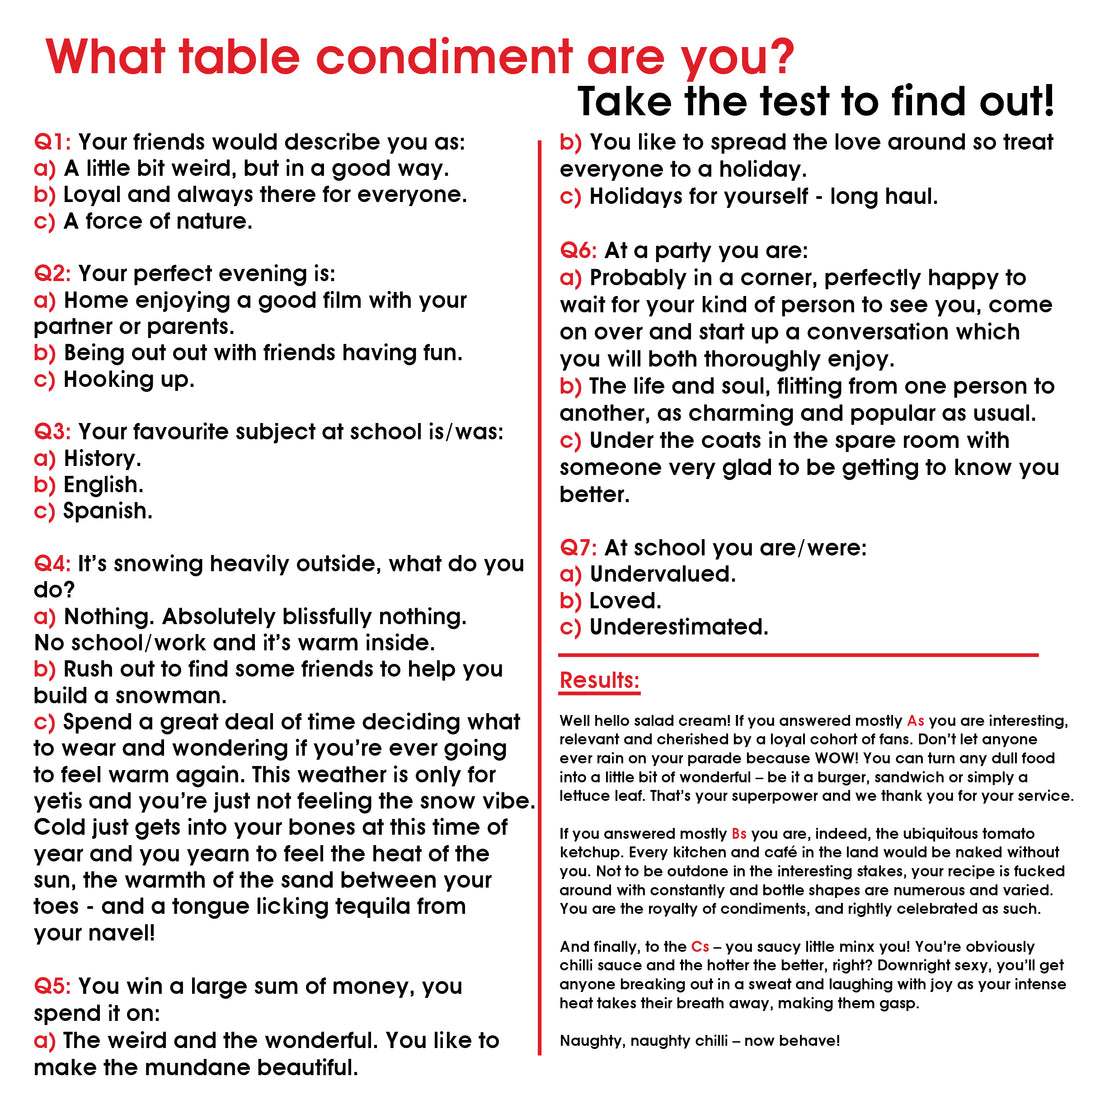 What Table Condiment Are You? Welcome to the Art of Mindlessness!